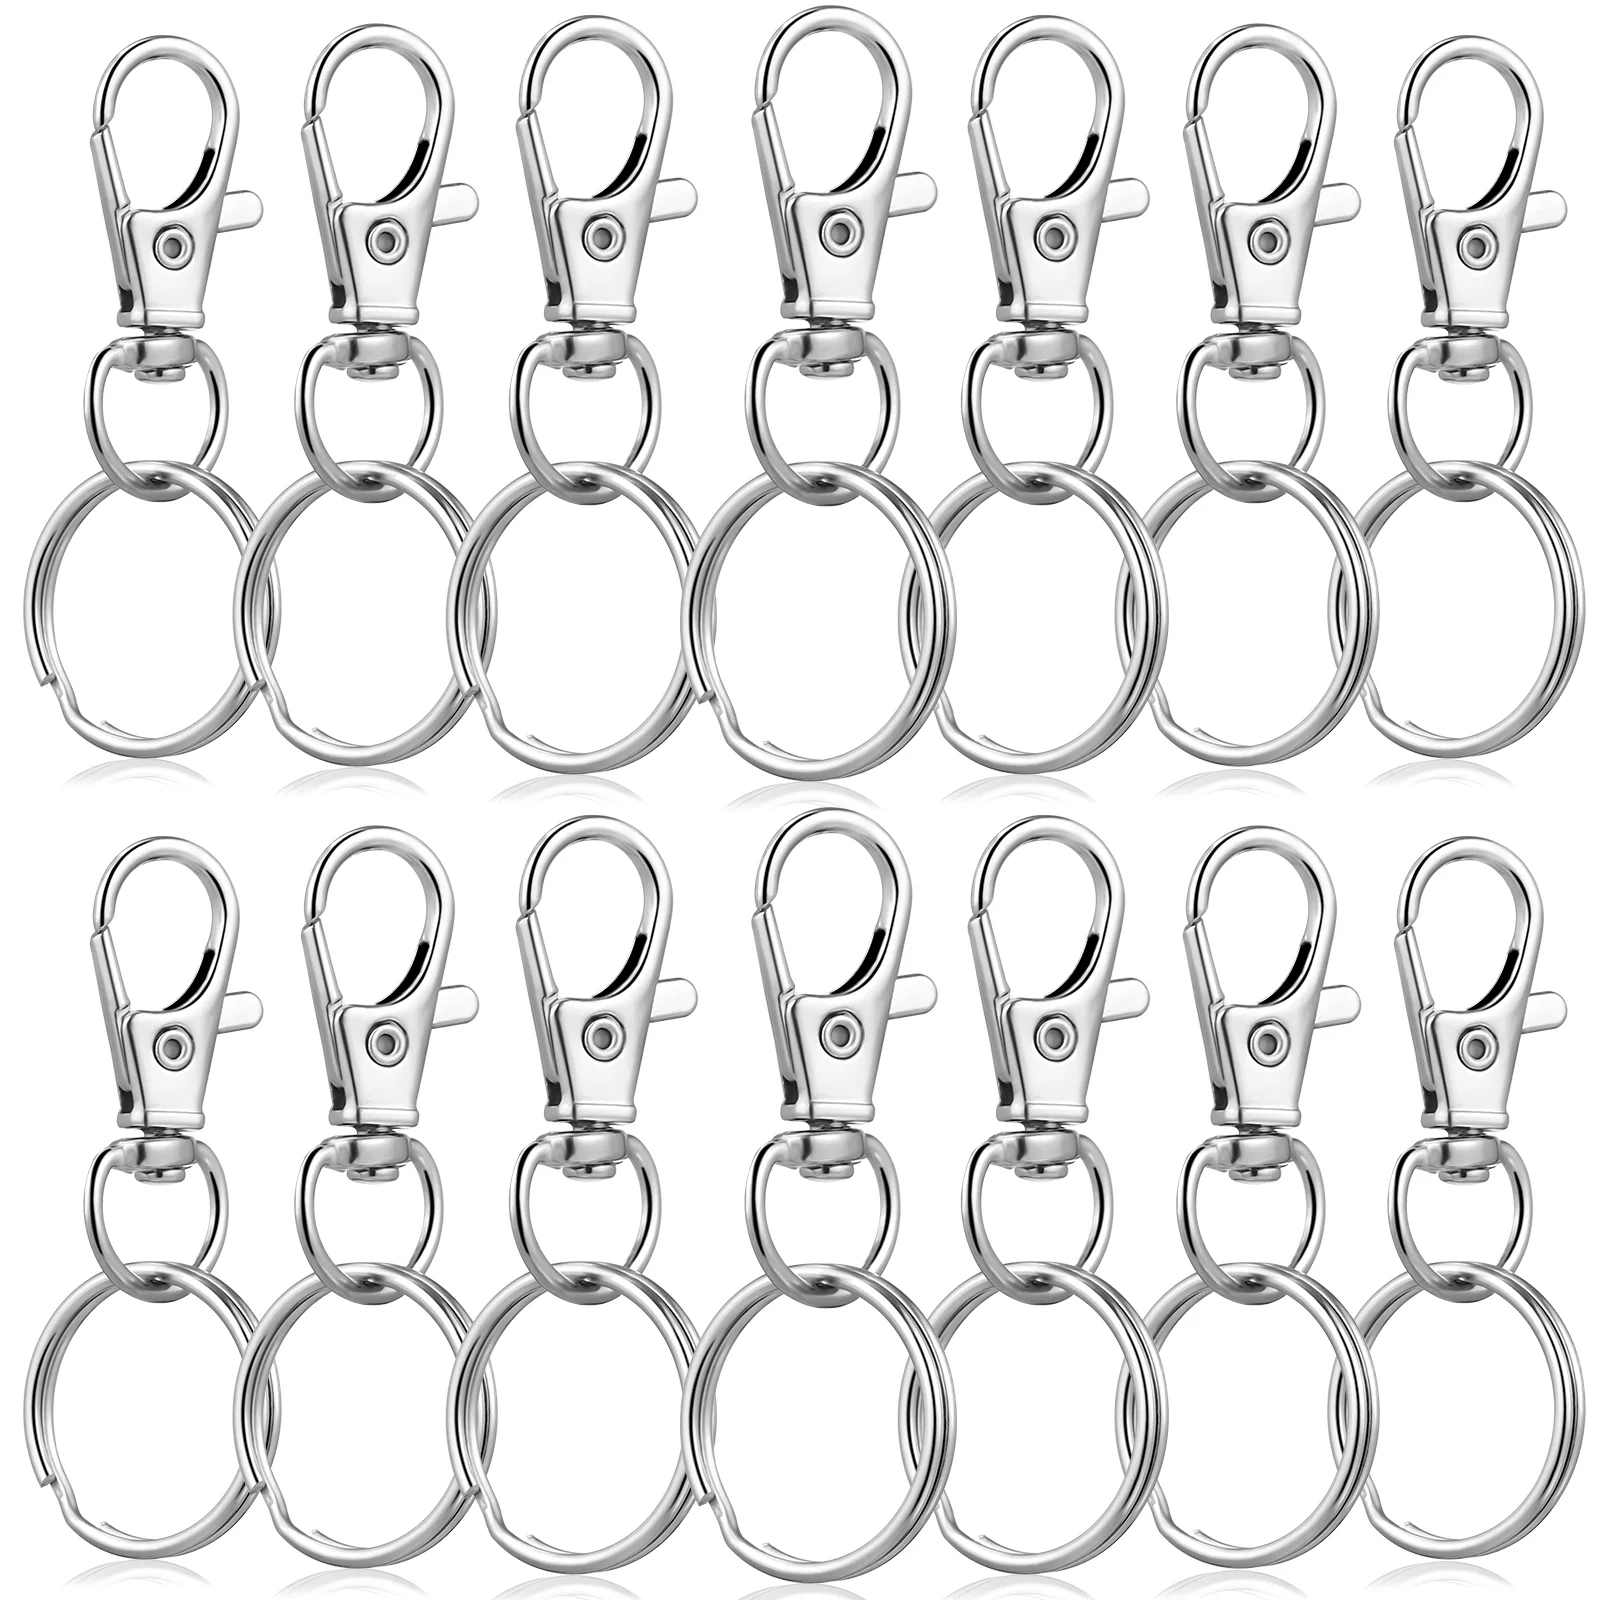 

Key Chain Keychain Clip Hooks Rings Snap Swivel Lobster Ring Hook Clips Clasp Bulk Claw Keychains Set Accessories Clasps Lanyard